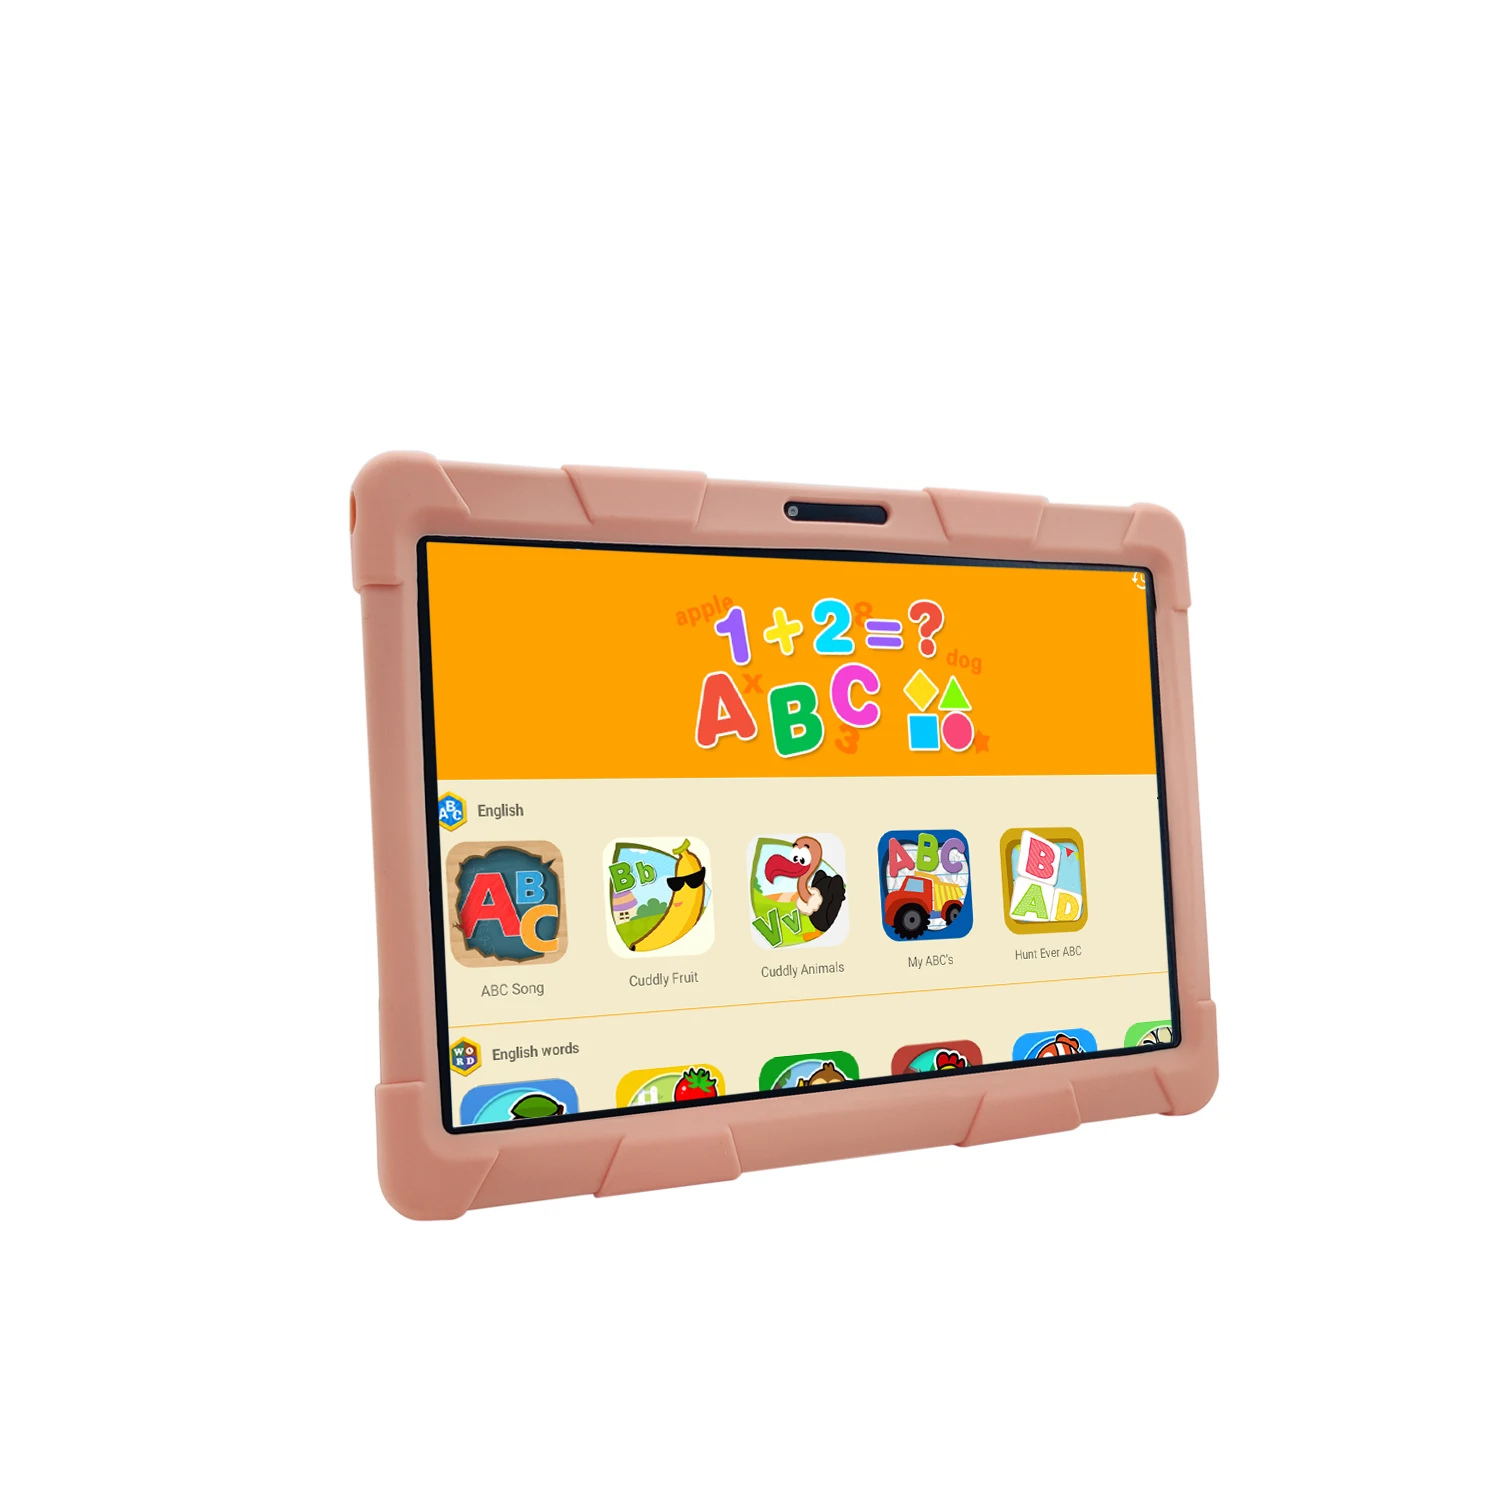 cheap 10 inch quad core android